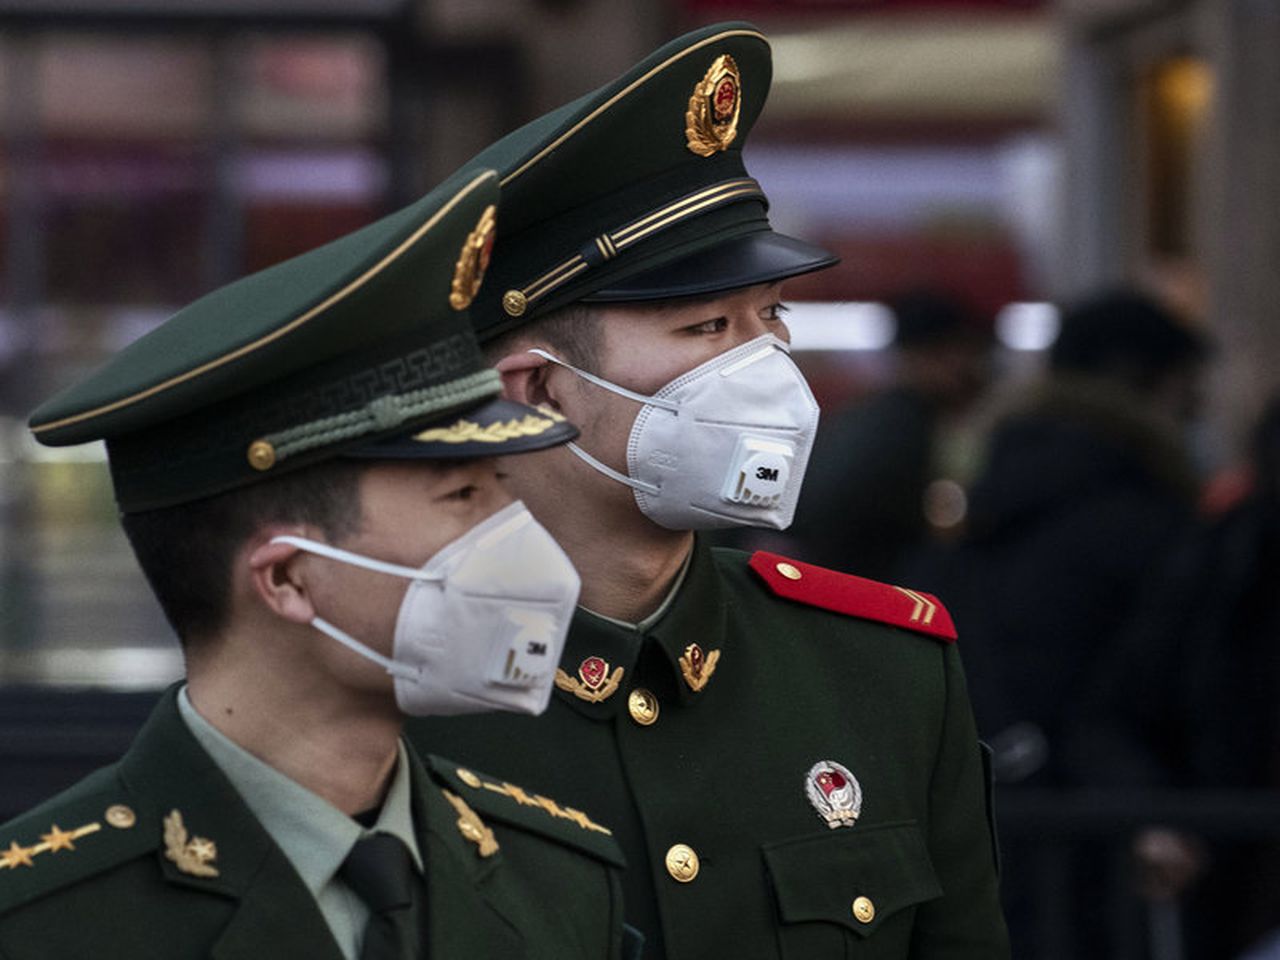 China claims to have the situation completely under control, image via Getty Images